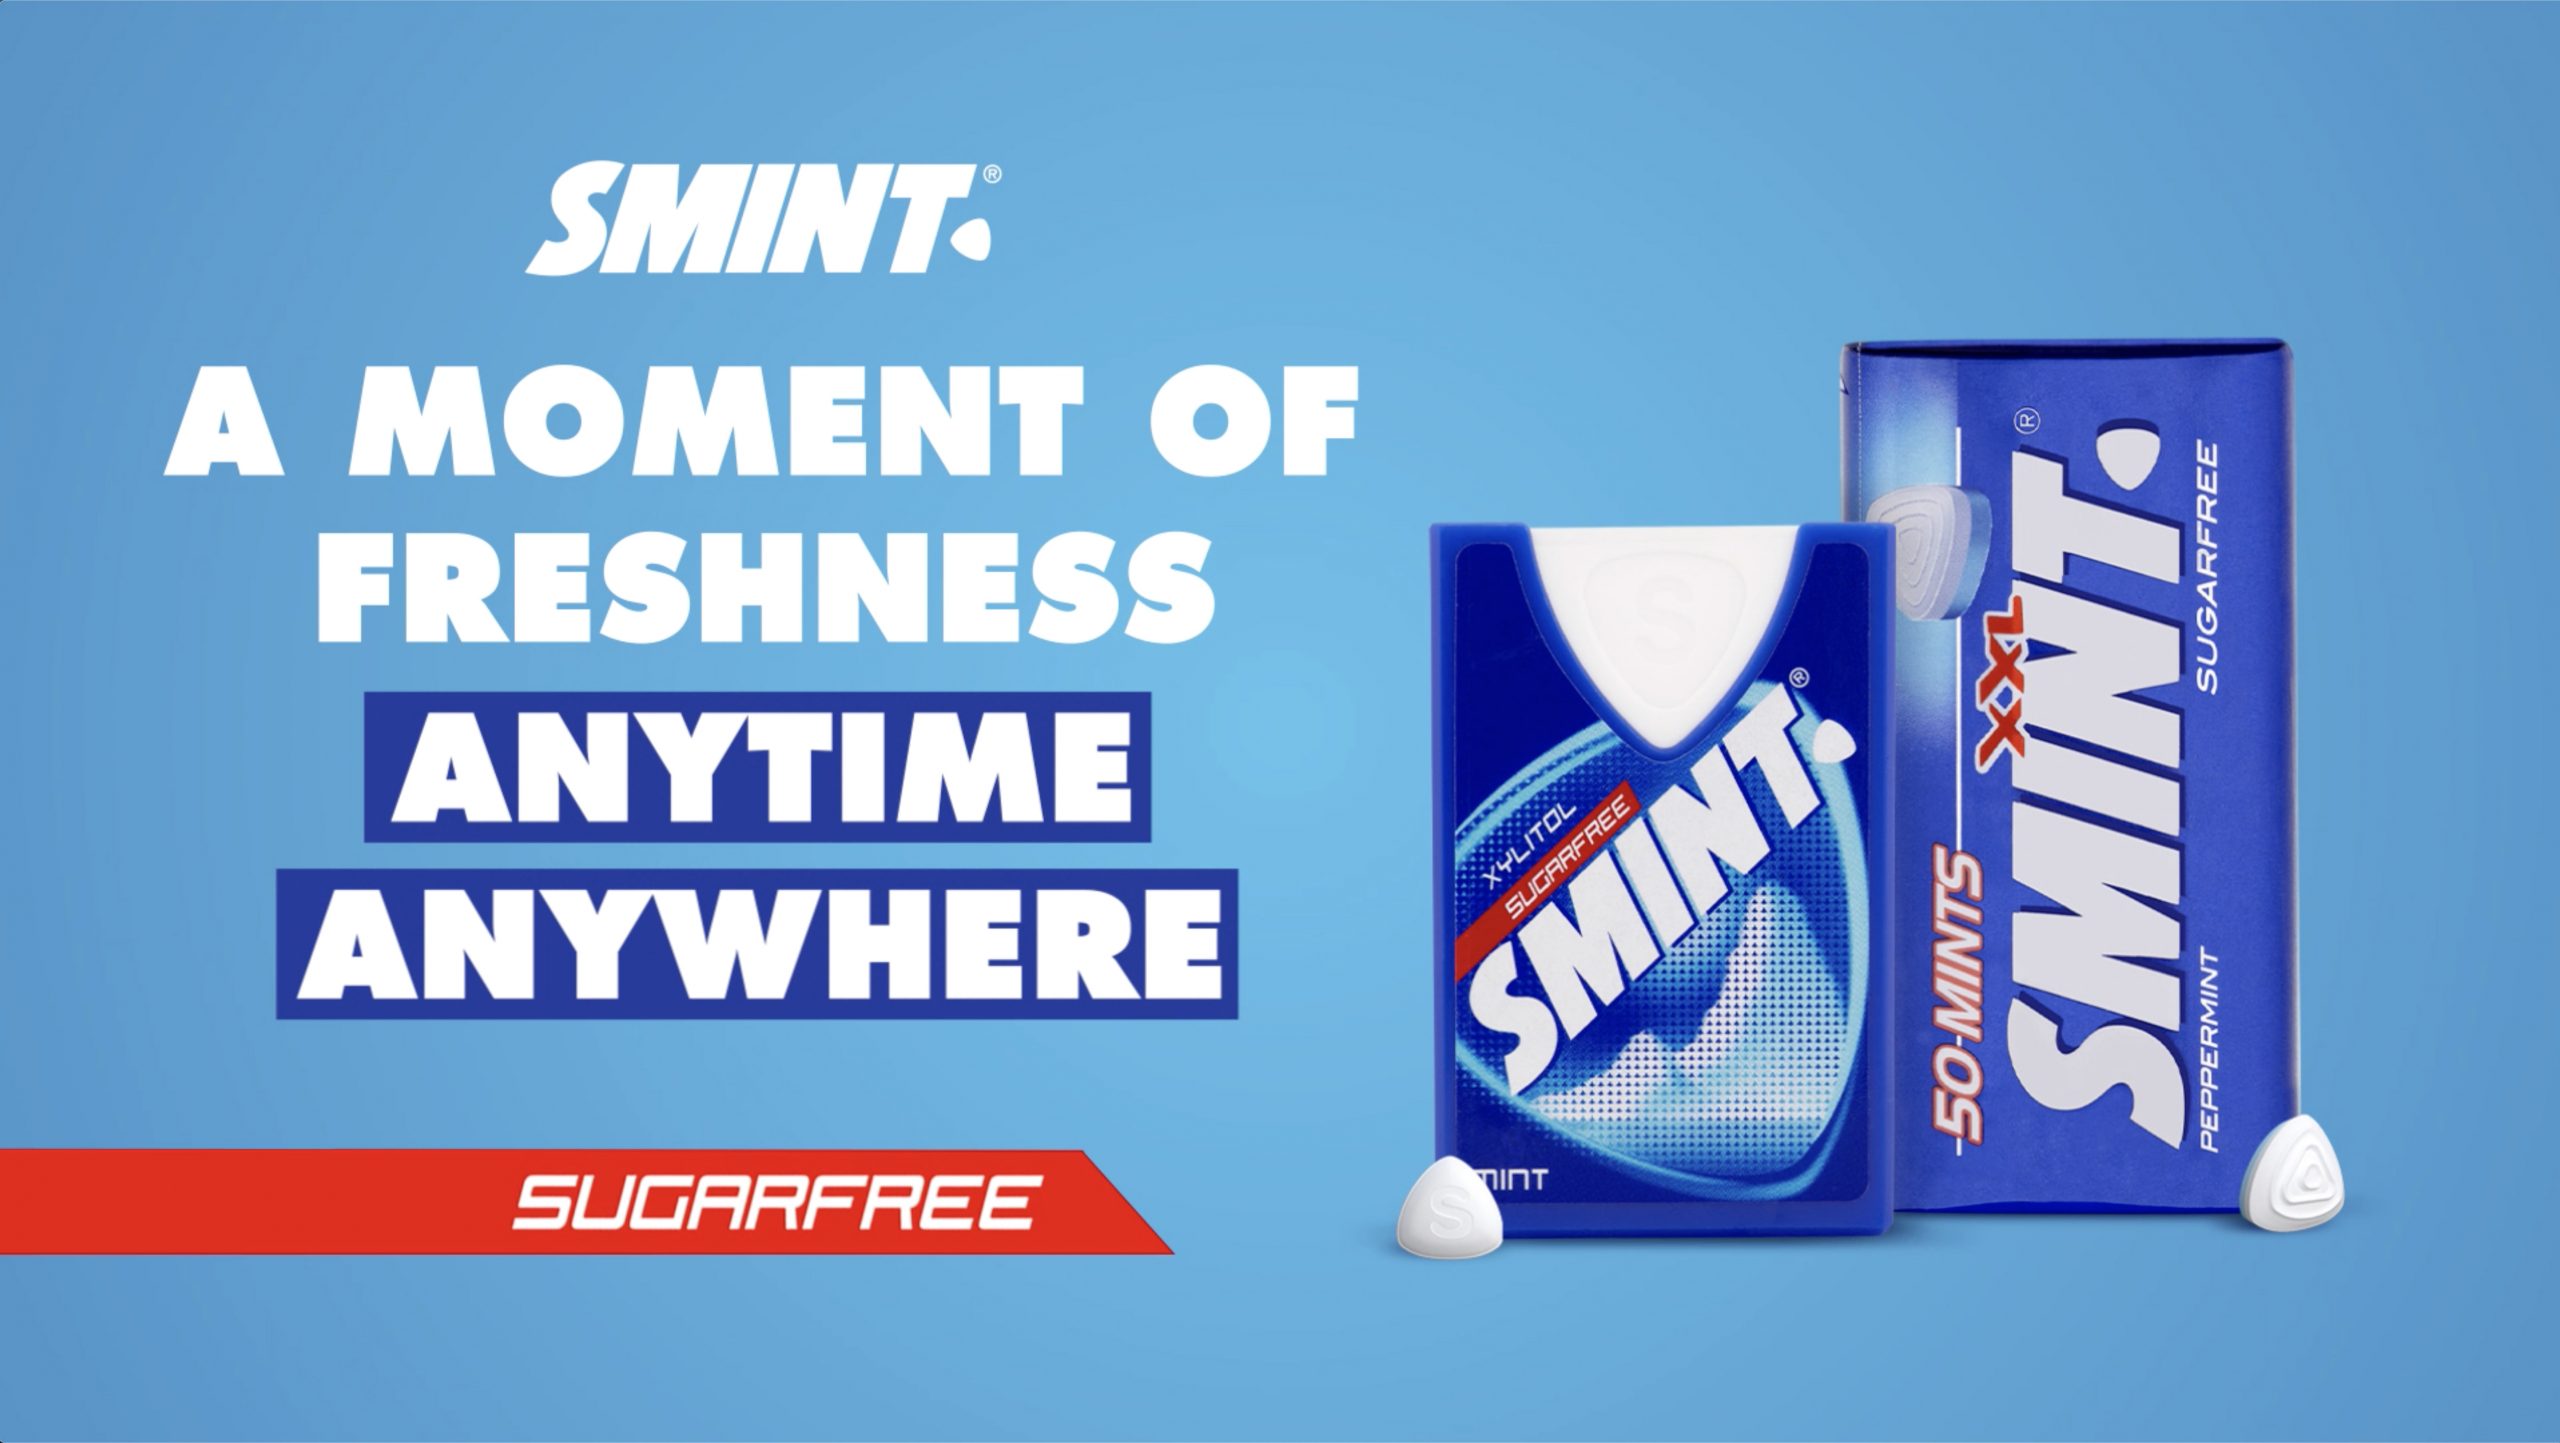 Smint highlights in-home consumption with new campaign